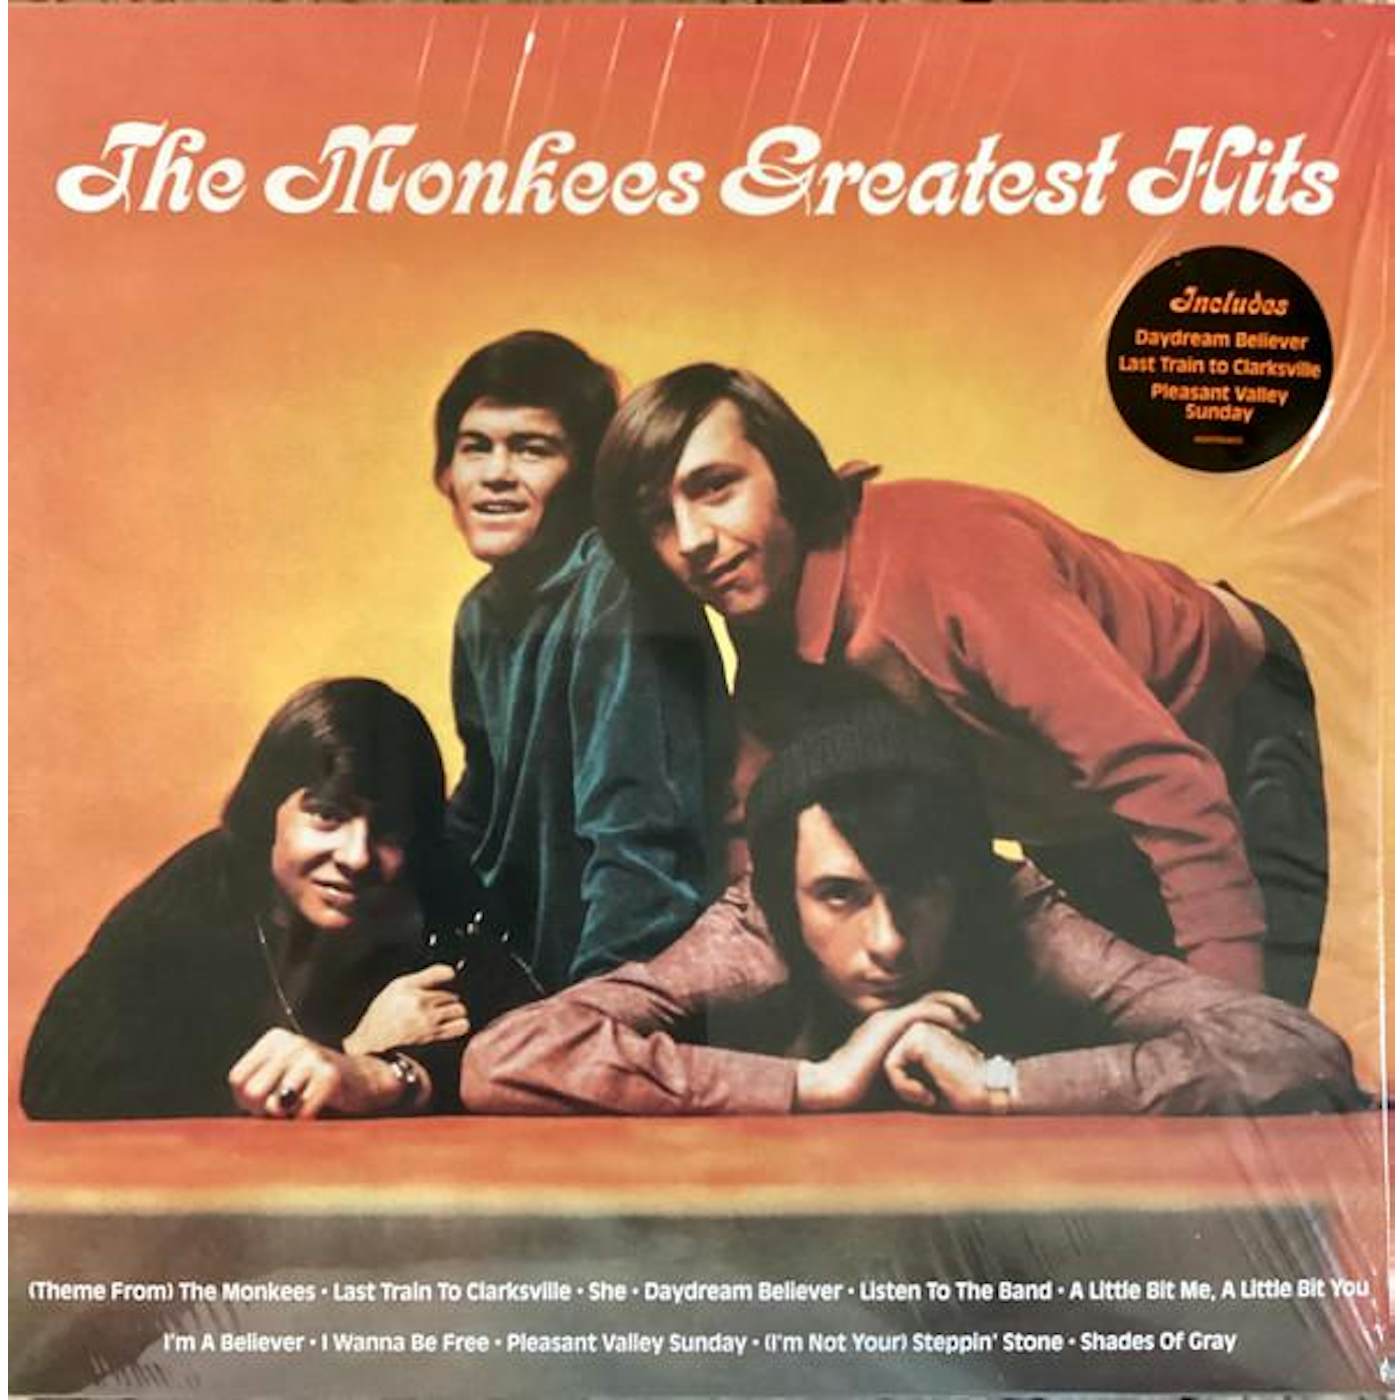 The Monkees GREATEST HITS Vinyl Record